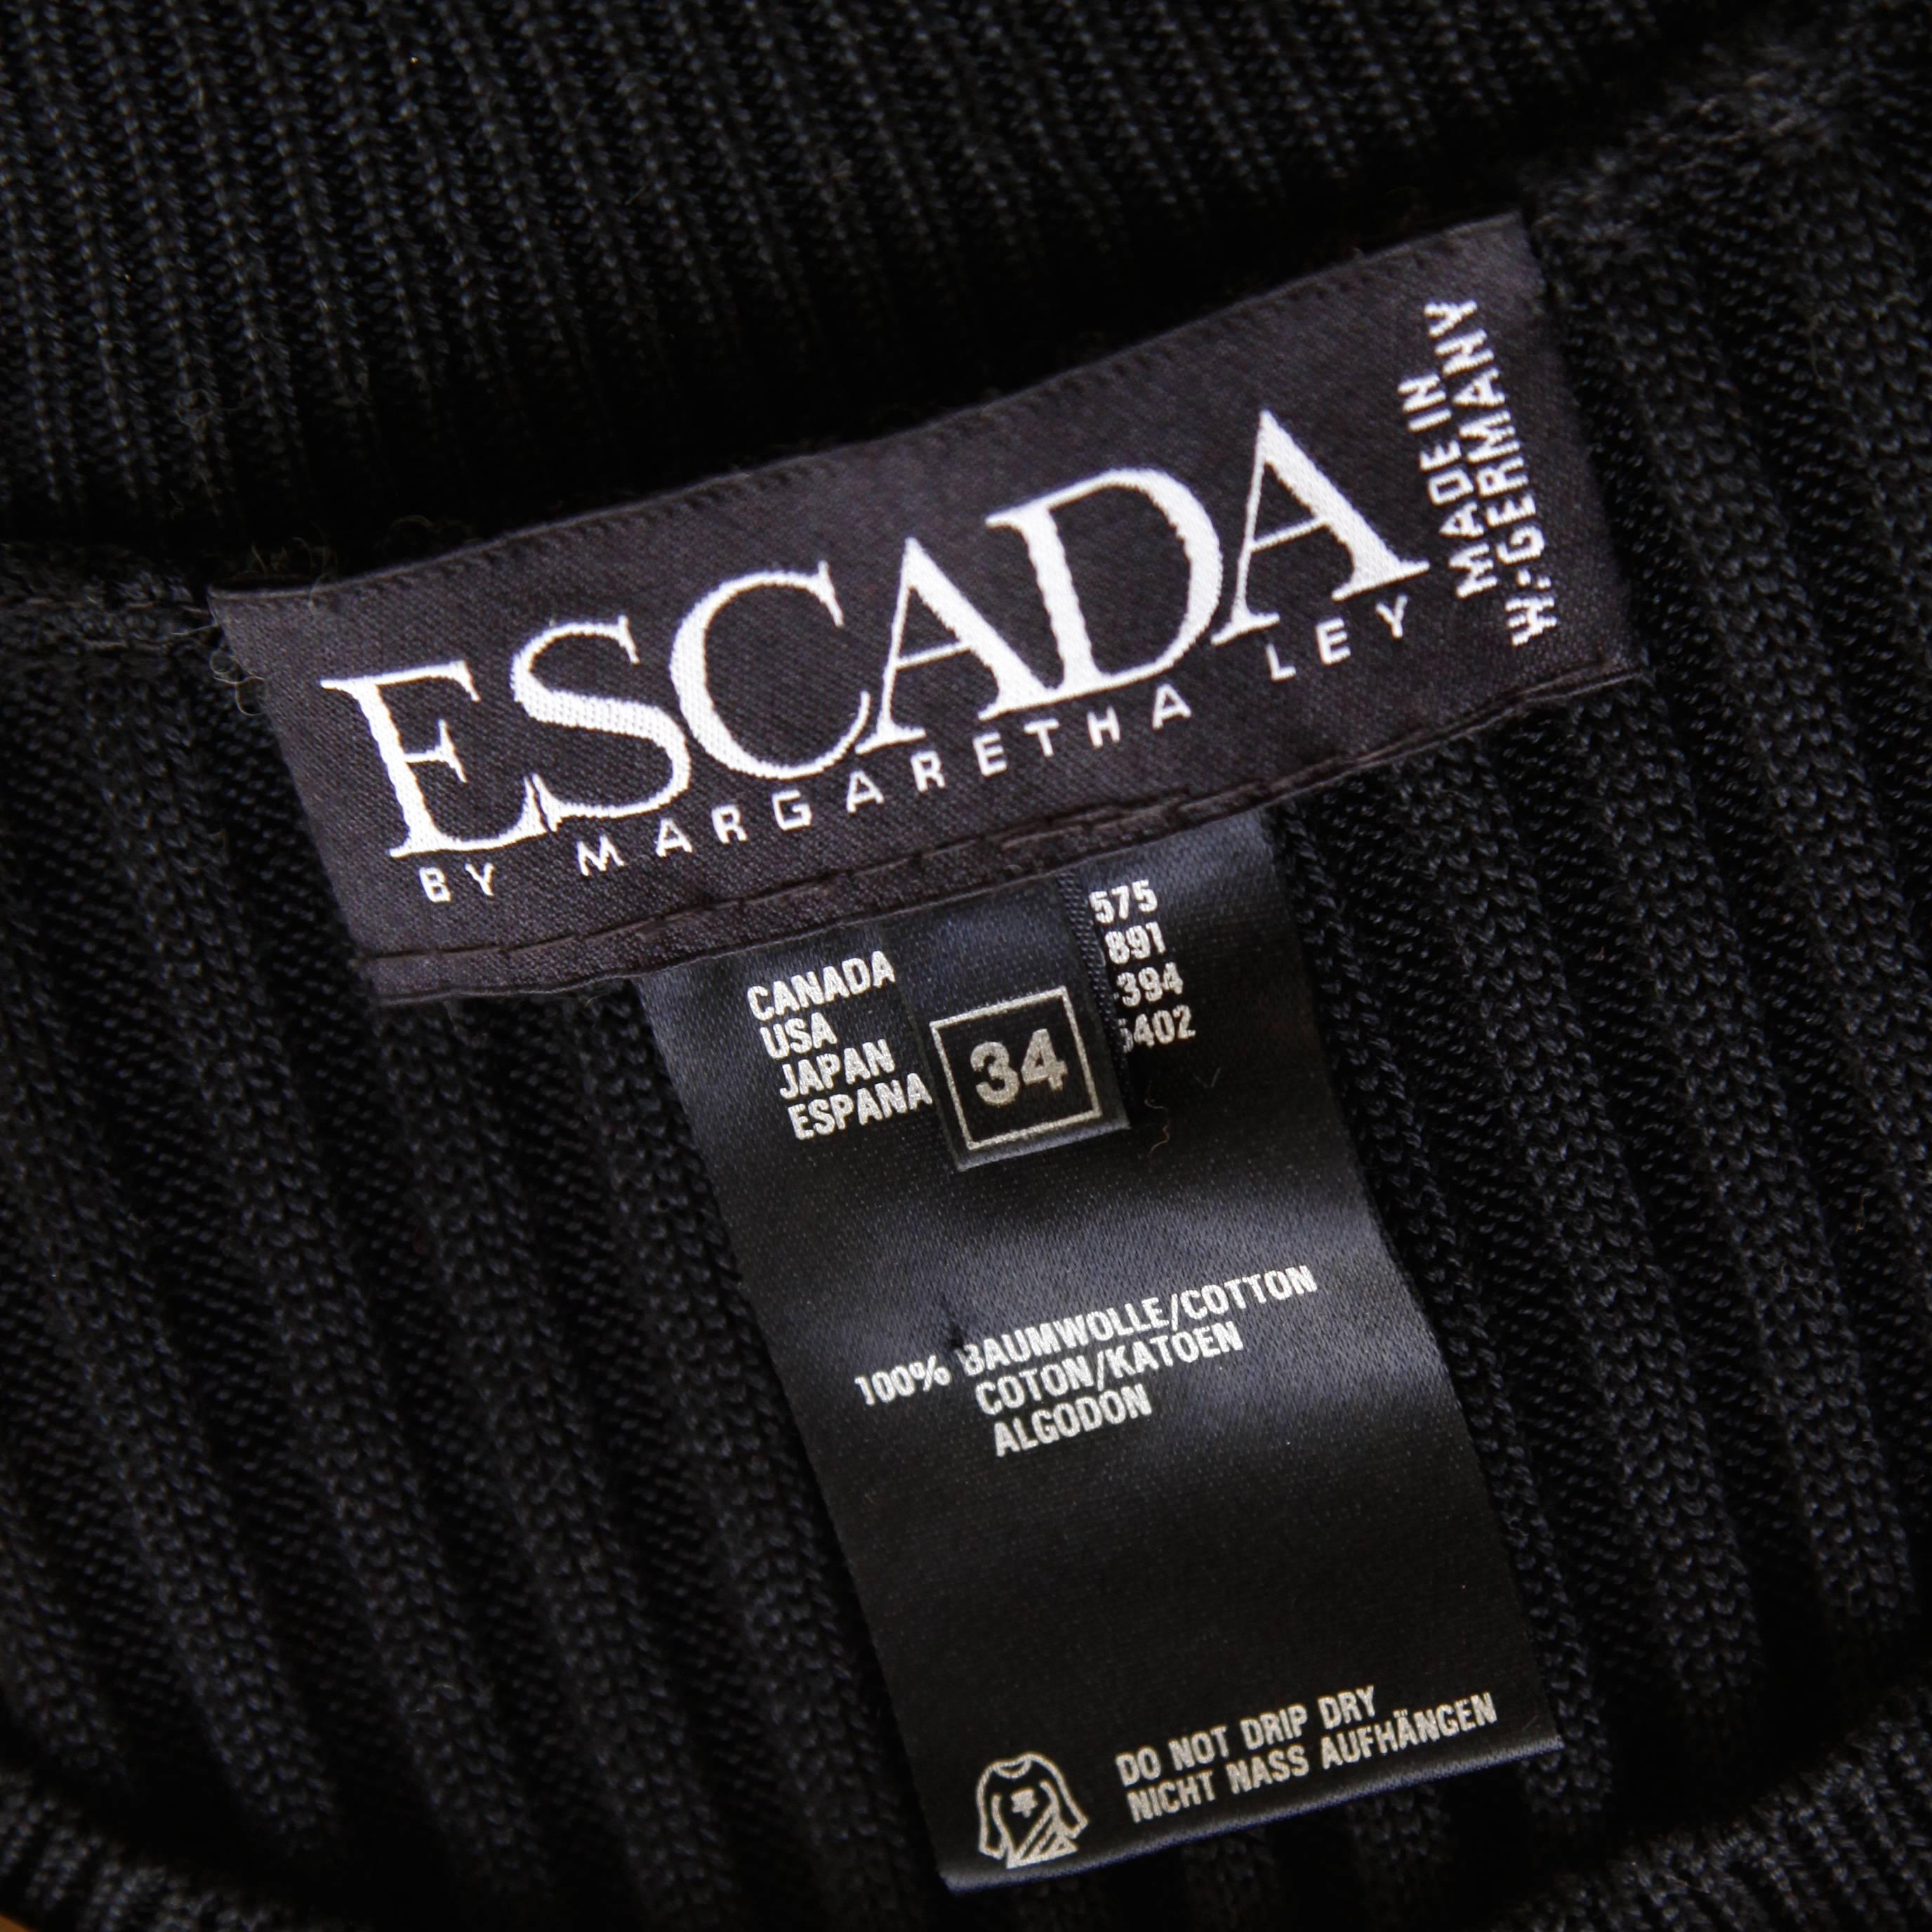 Vintage black ribbed cotton knit top by Escada with shiny gold stud appliques. Short sleeves. Unlined. 100% Cotton. The marked size is an EU 34 and the top fits like a modern size small. The bust measures 30-40", waist 24-38", and total